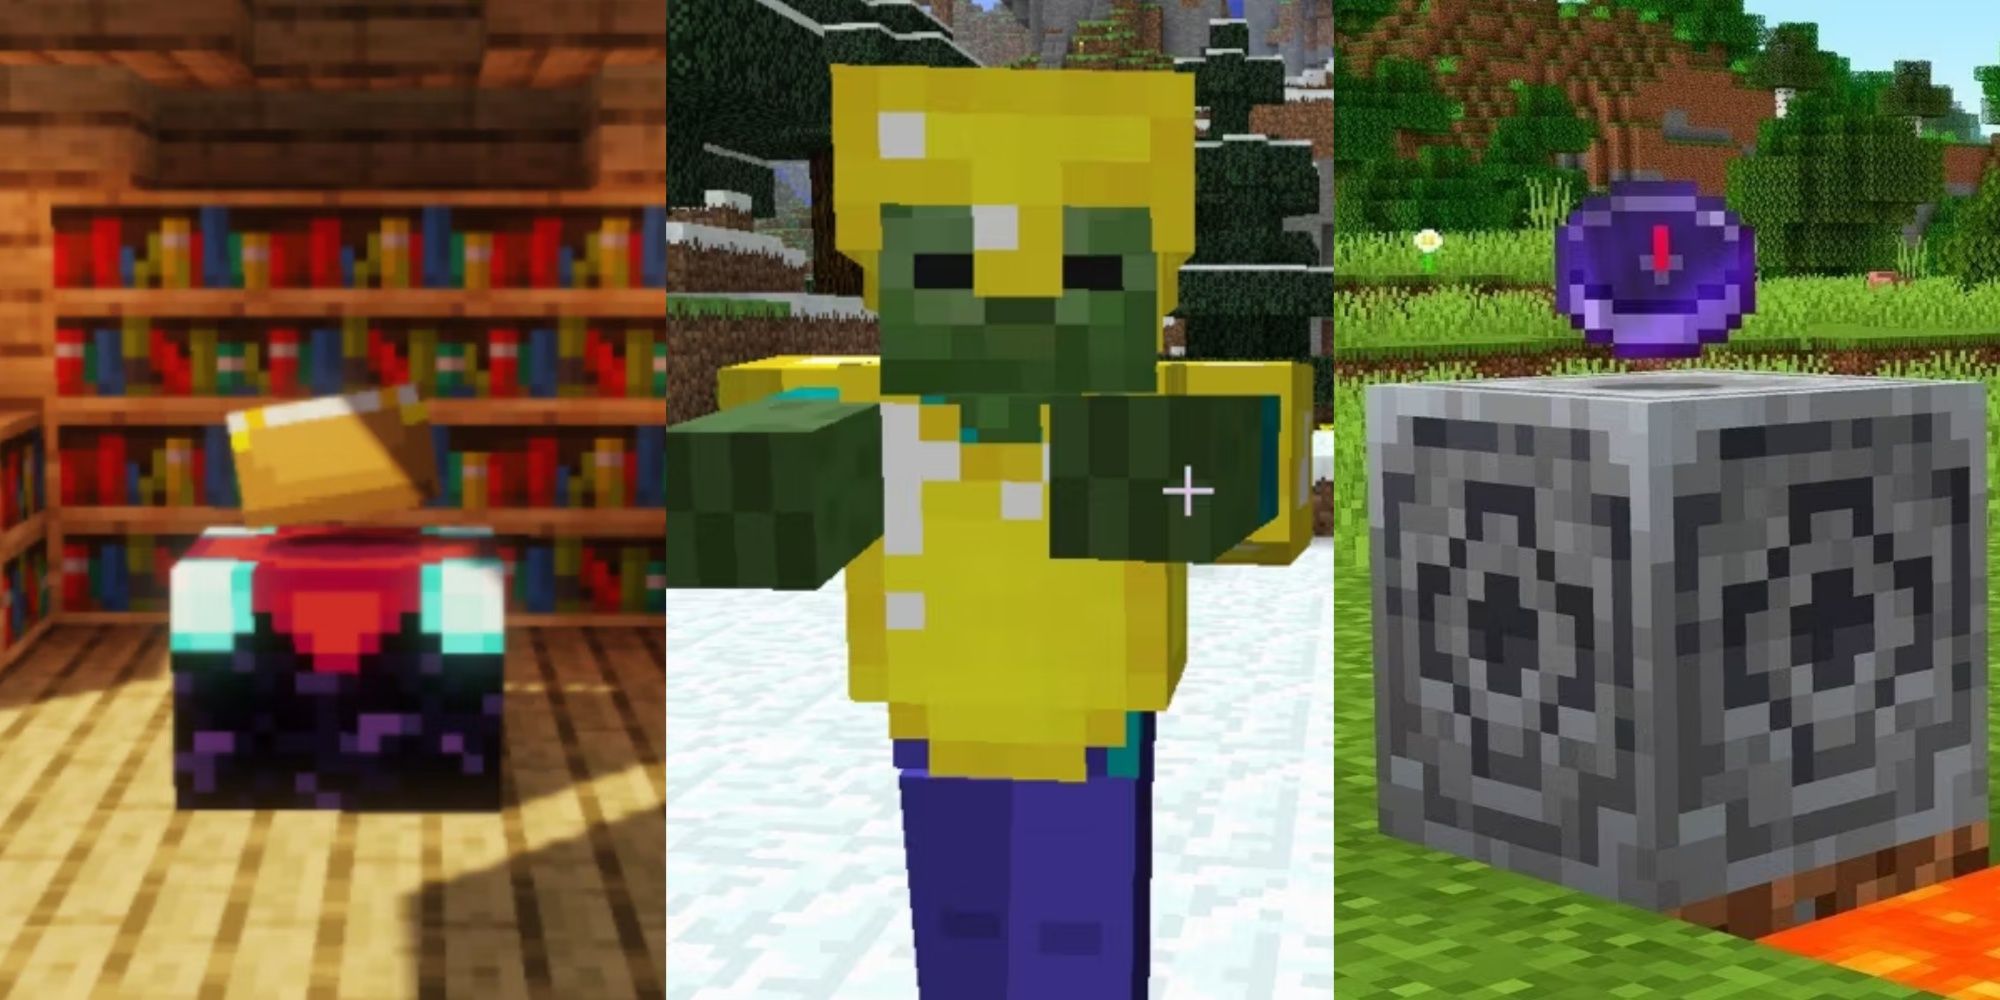 Split images of an enchanted crafting table, a zombiee wearing gold armor, and a lodestone in Minecraft.